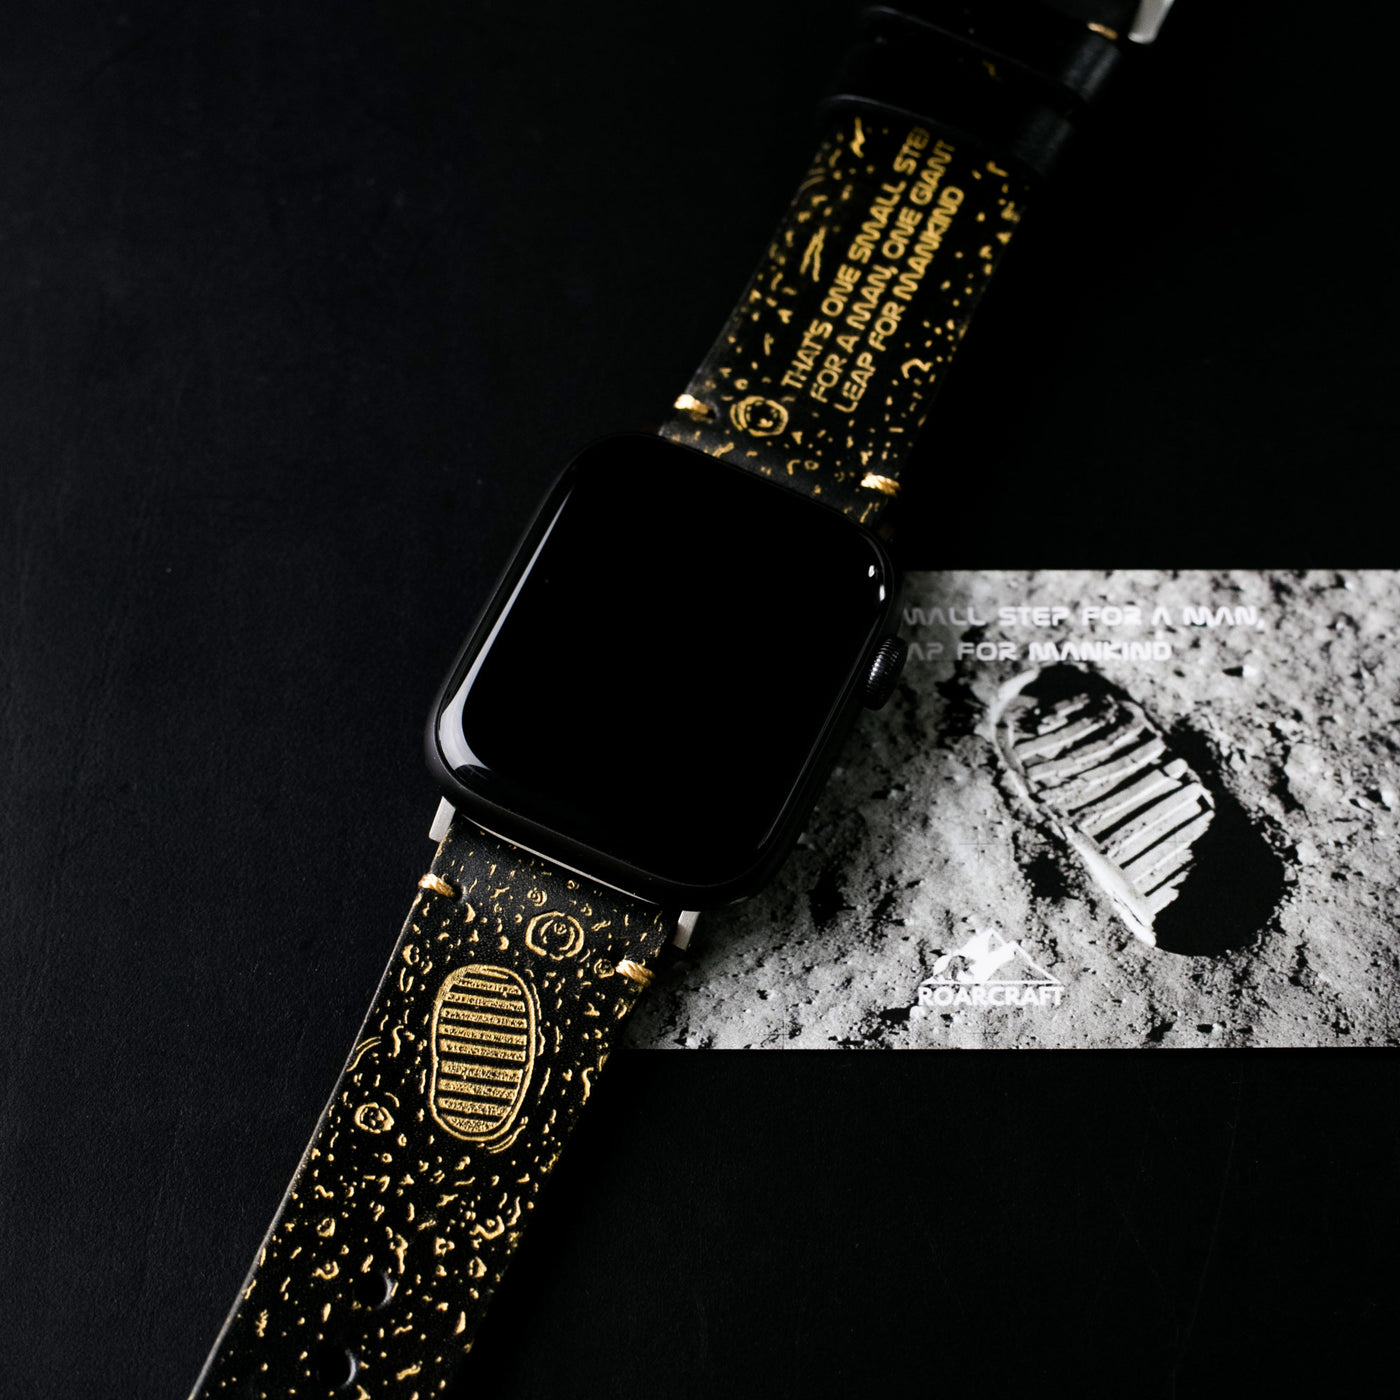 Gold Moon - Apple Watch Leather Band - Black